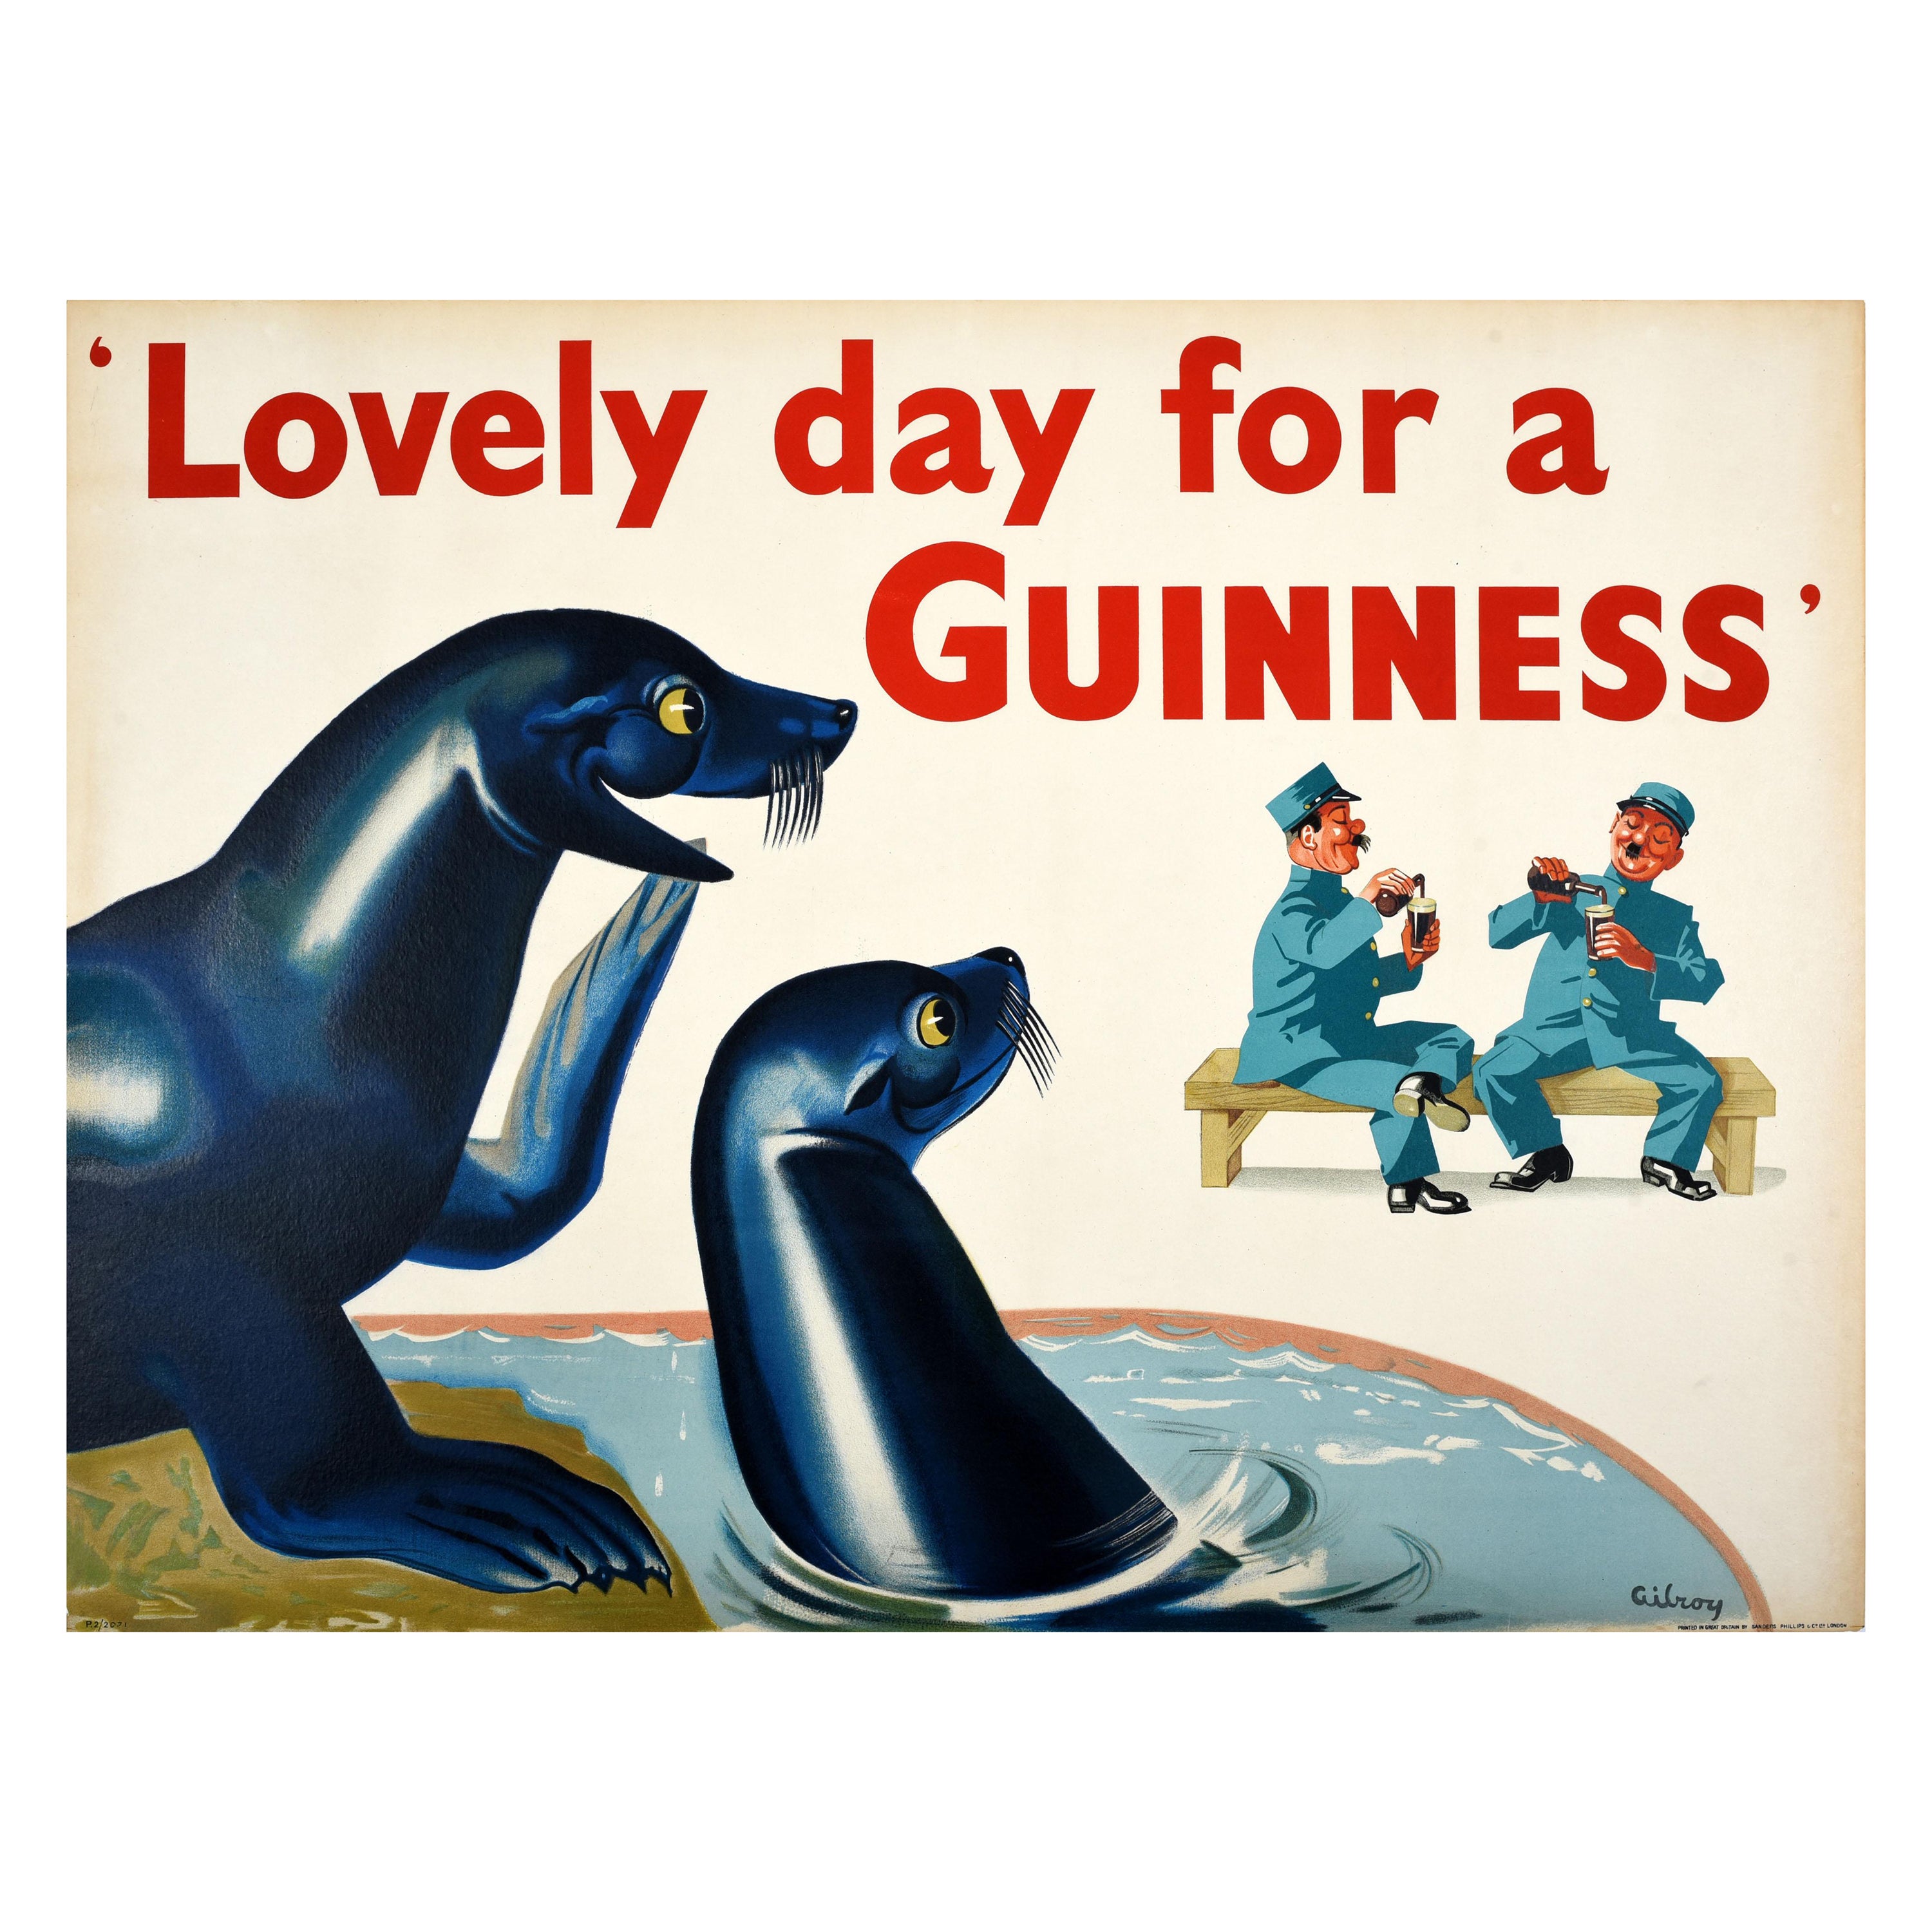 Original Vintage Advertising Poster Lovely Day For A Guinness Irish Stout Gilroy For Sale